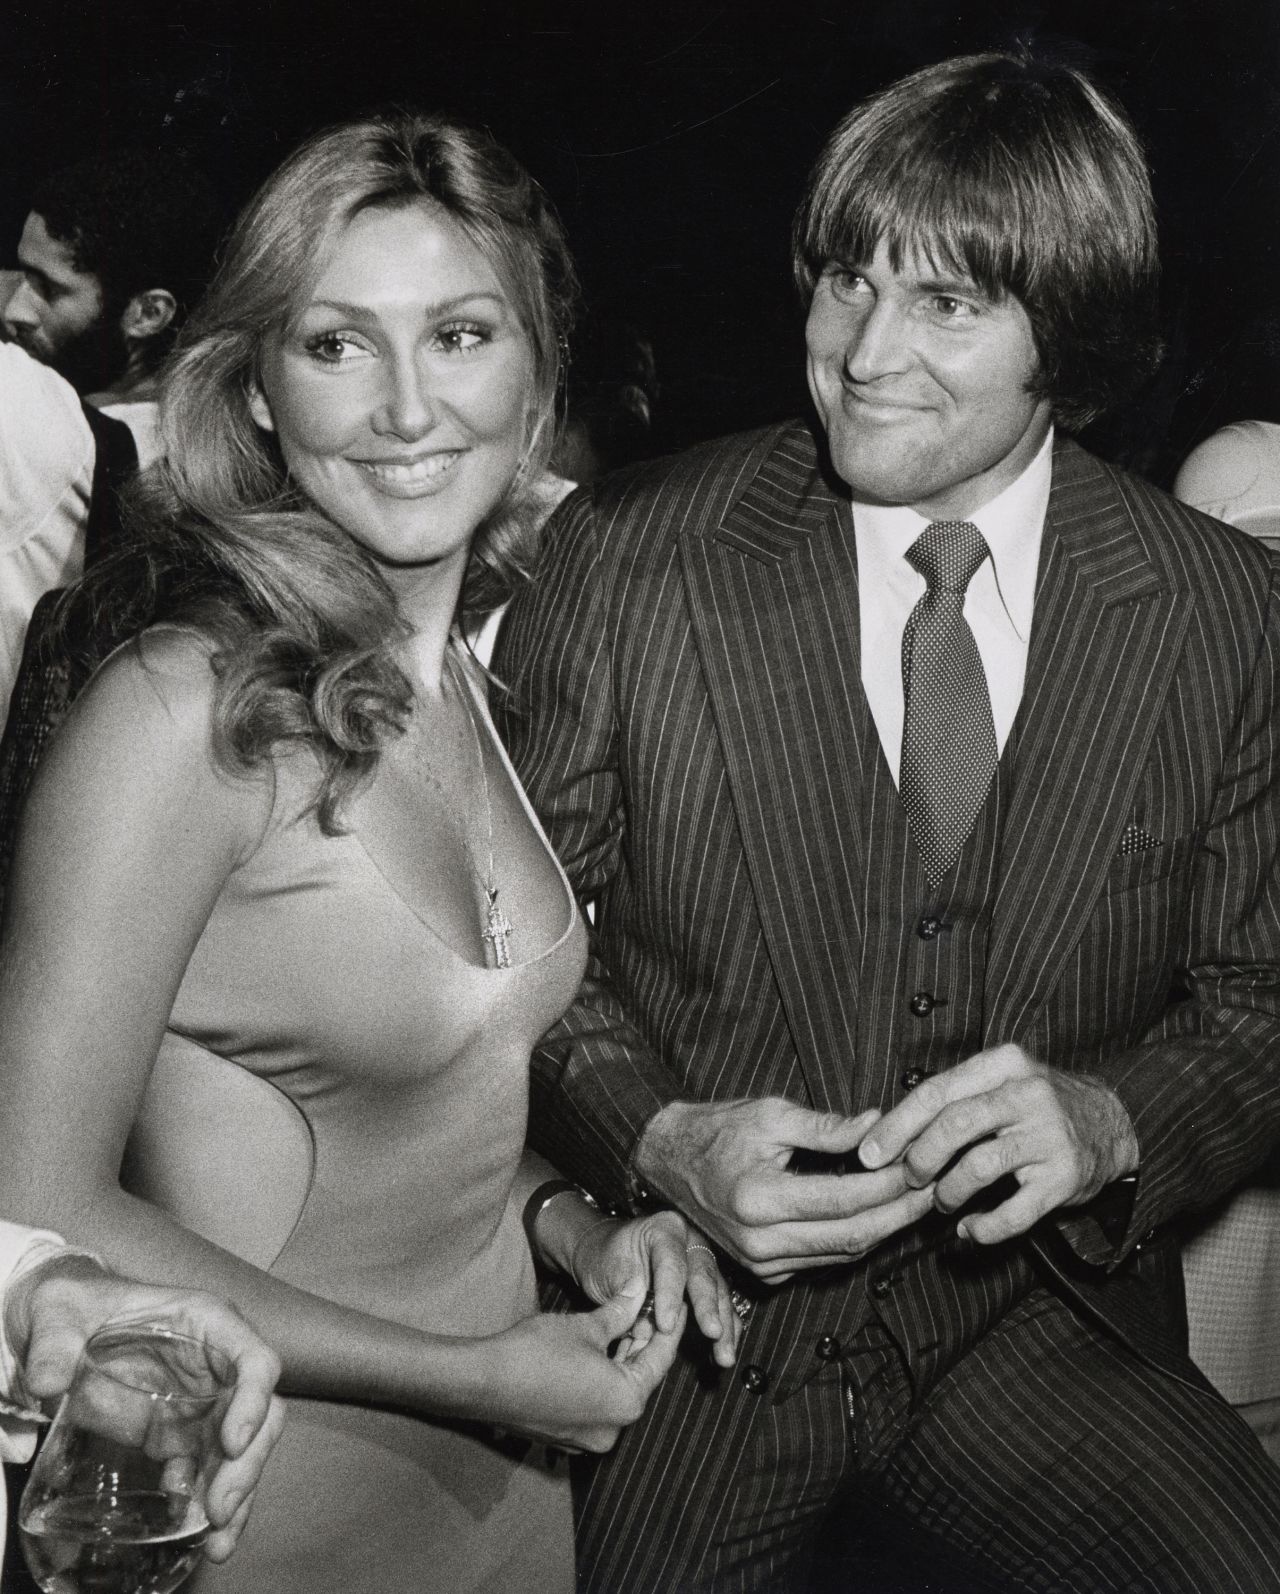 Linda Thompson, who became Jenner's second wife, accompanies Jenner at the New York premiere of the movie "Can't Stop the Music" in June 1980. Jenner appeared in the movie, which was a huge dud and won the first Razzie award for worst picture.